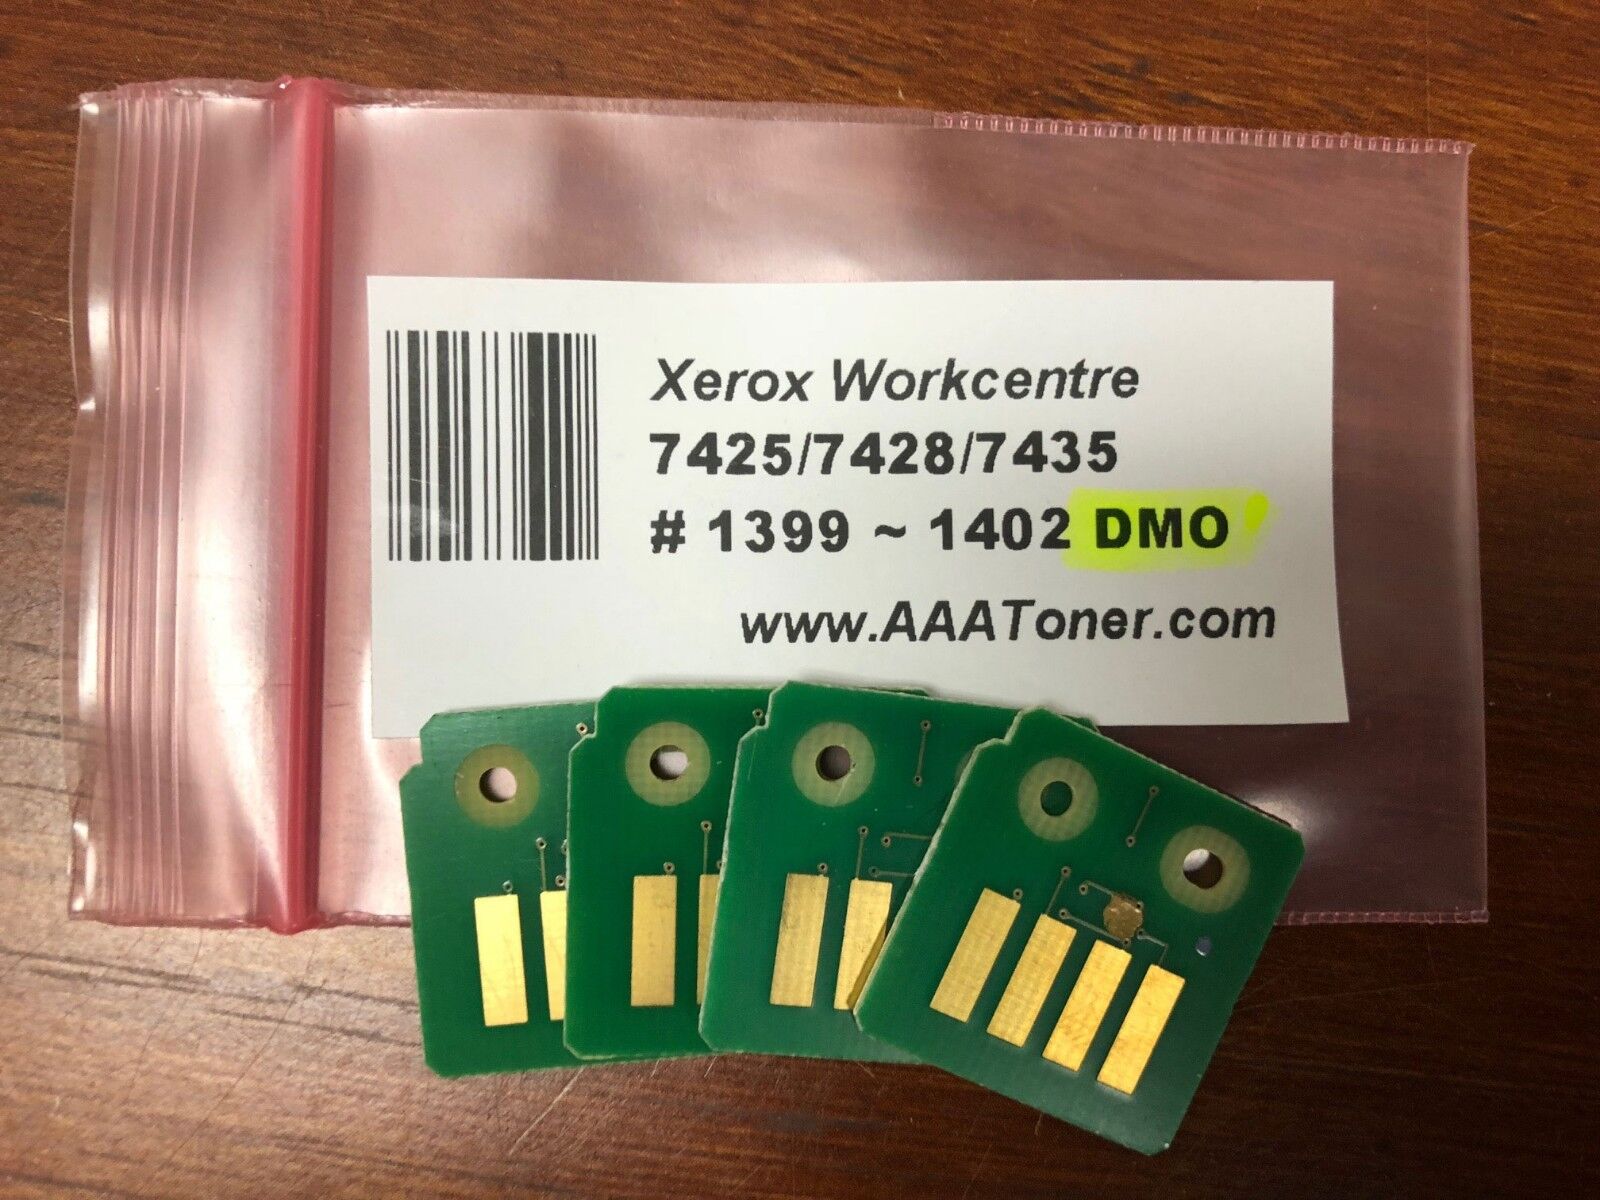 4 x Toner Chip for Xerox Workcentre 7425 7428 7435 Refill (1399 - 1402 DMO)